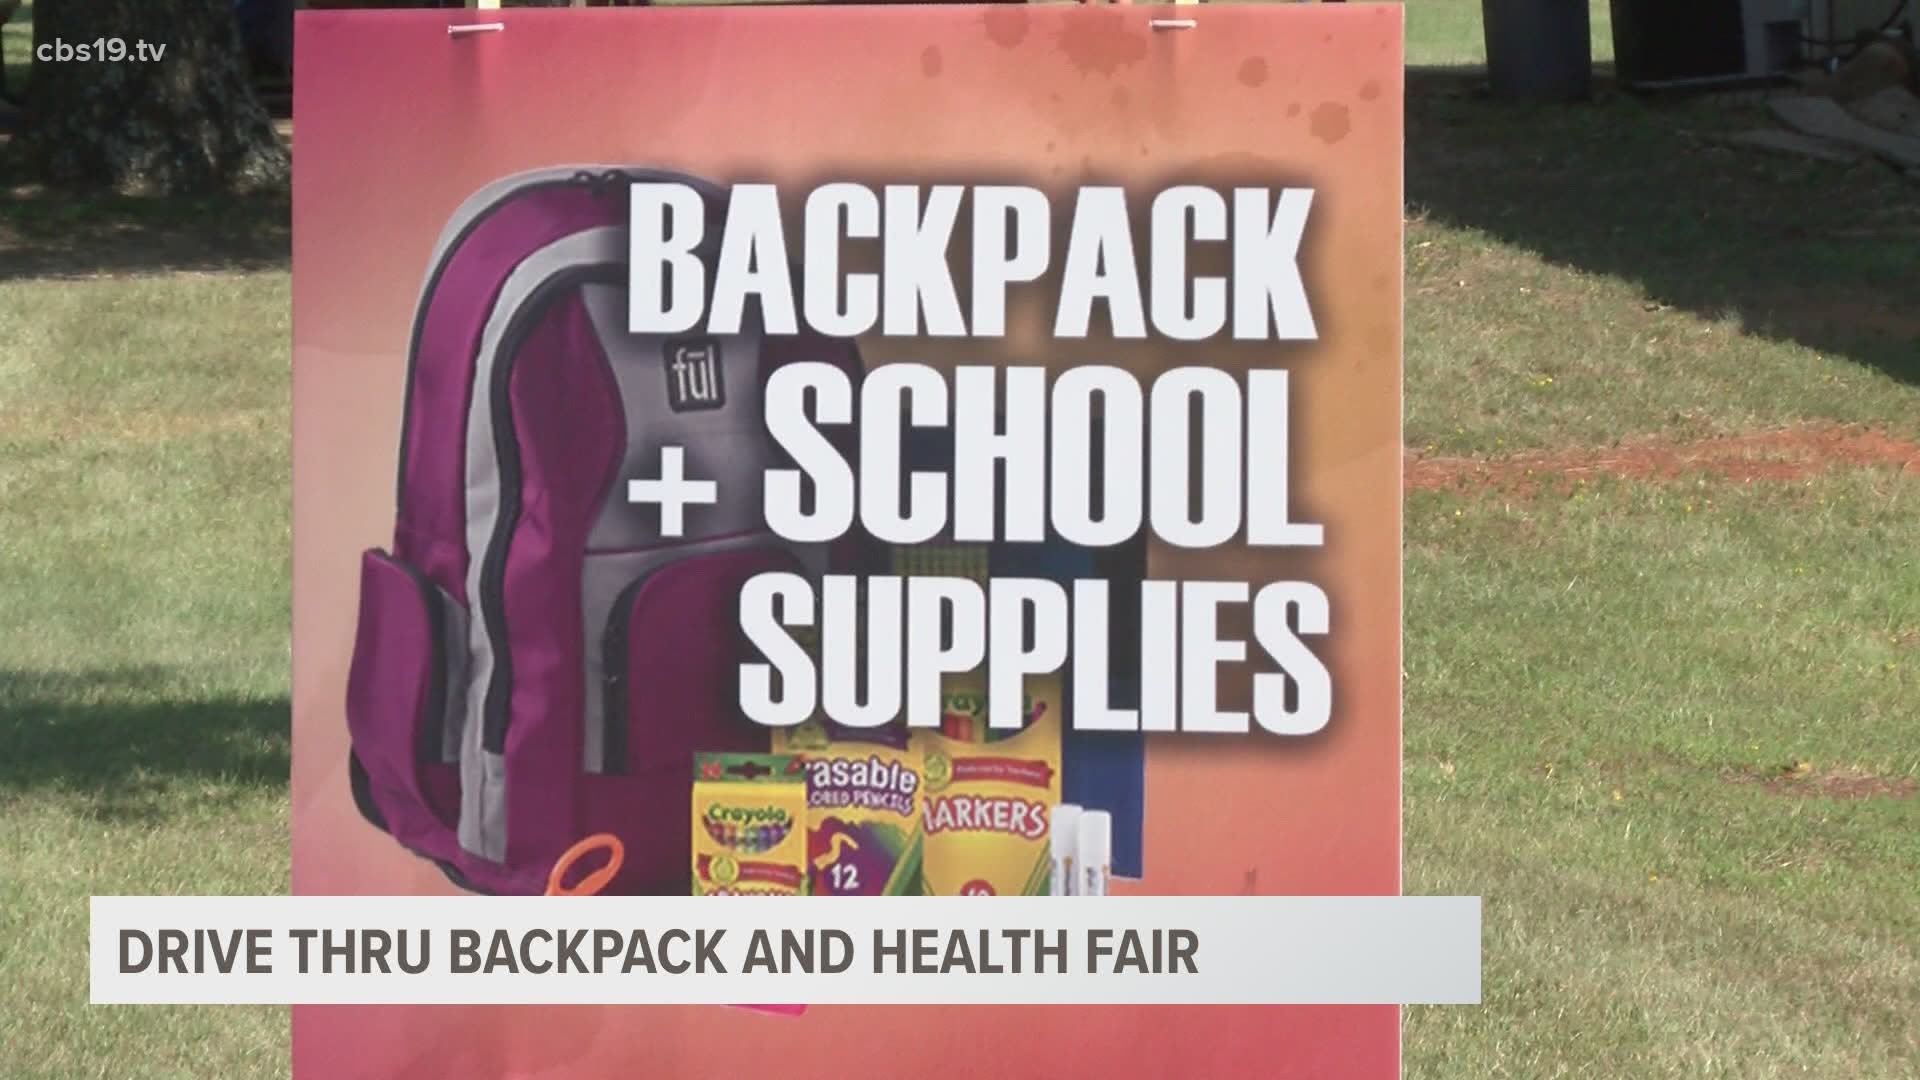 The Back-to-School Health Fair in Whitehouse is an annual event to prepare students to go back to class. However, the pandemic reduced the event to drive-thru only.